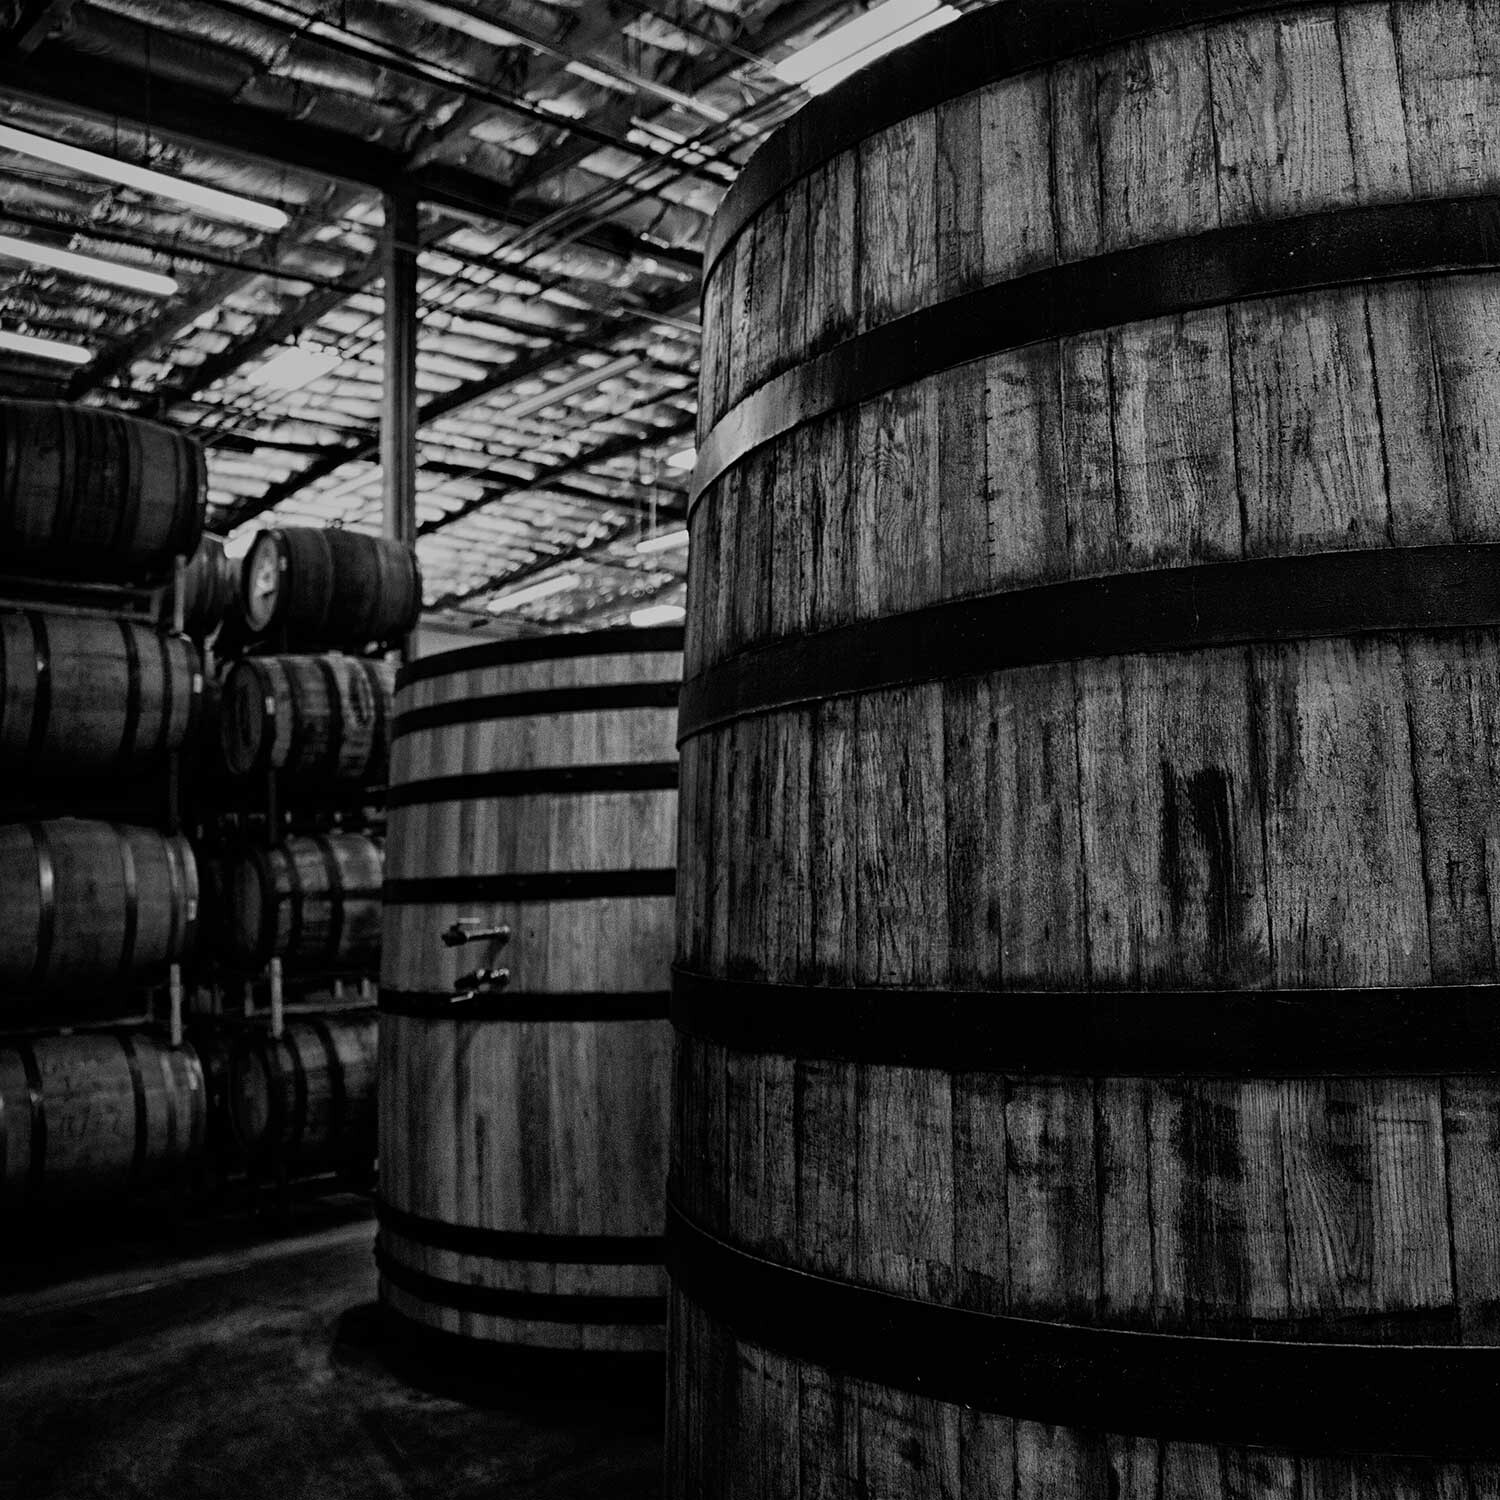 Barrels in the warehouse